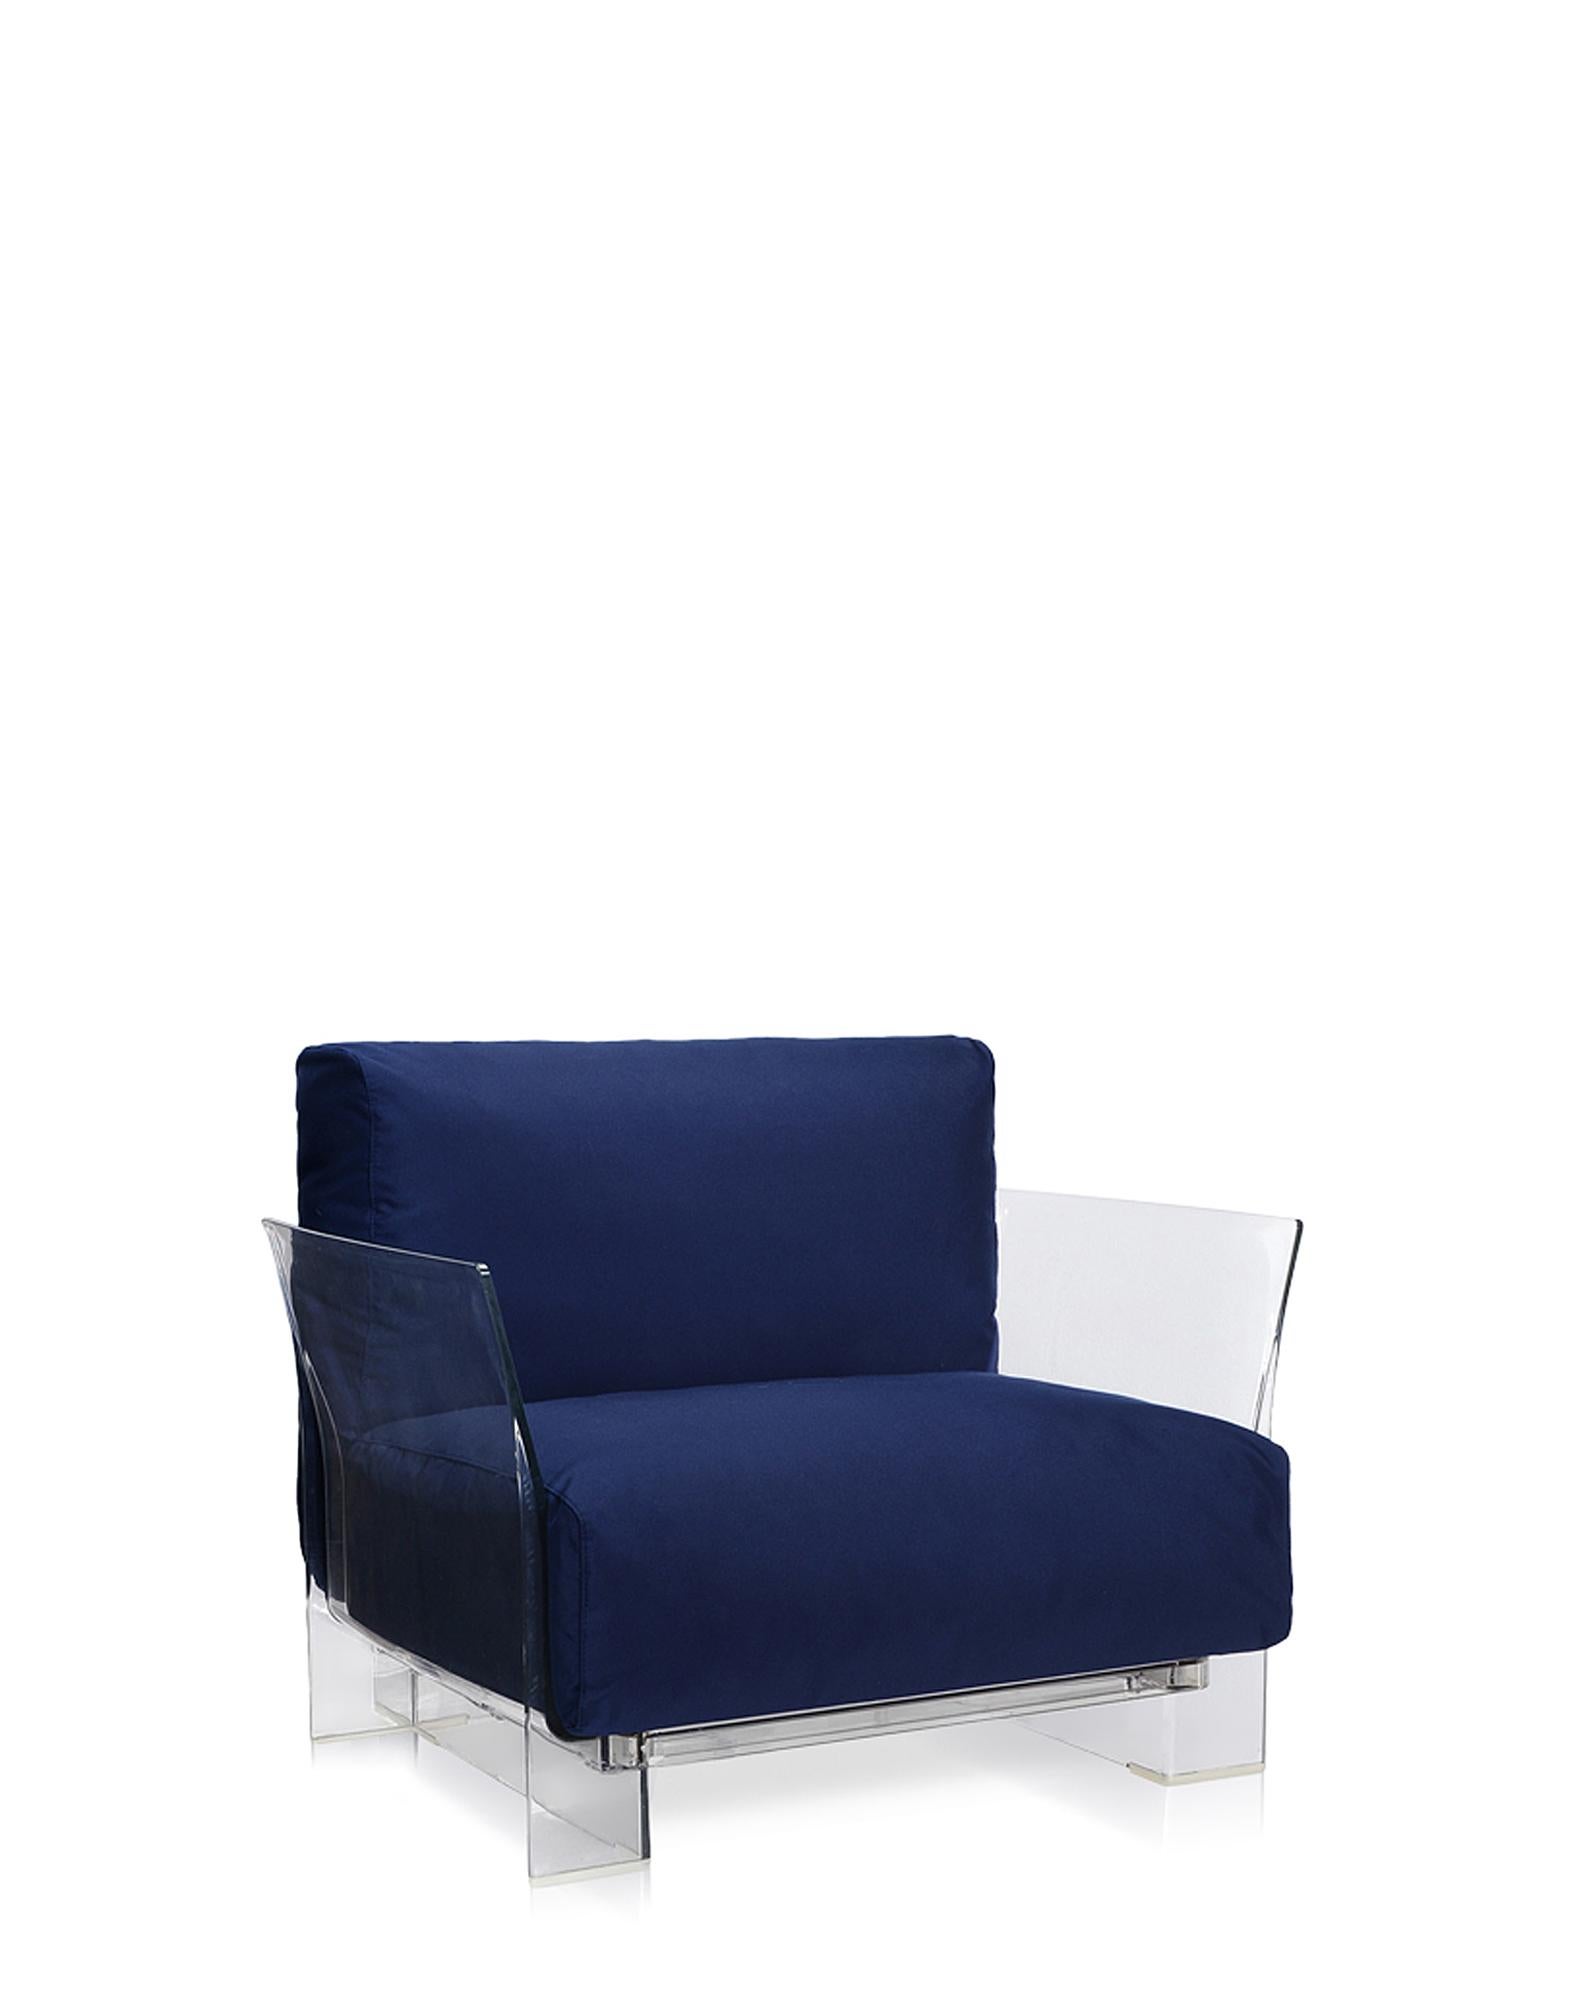 Pop outdoor is the modular sofa with evanescent profiles characterised by large seat and backrest cushions which make it soft and comfortable, made with fabrics conceived specifically for outdoor use. 
The Pop collection is completed by an armchair